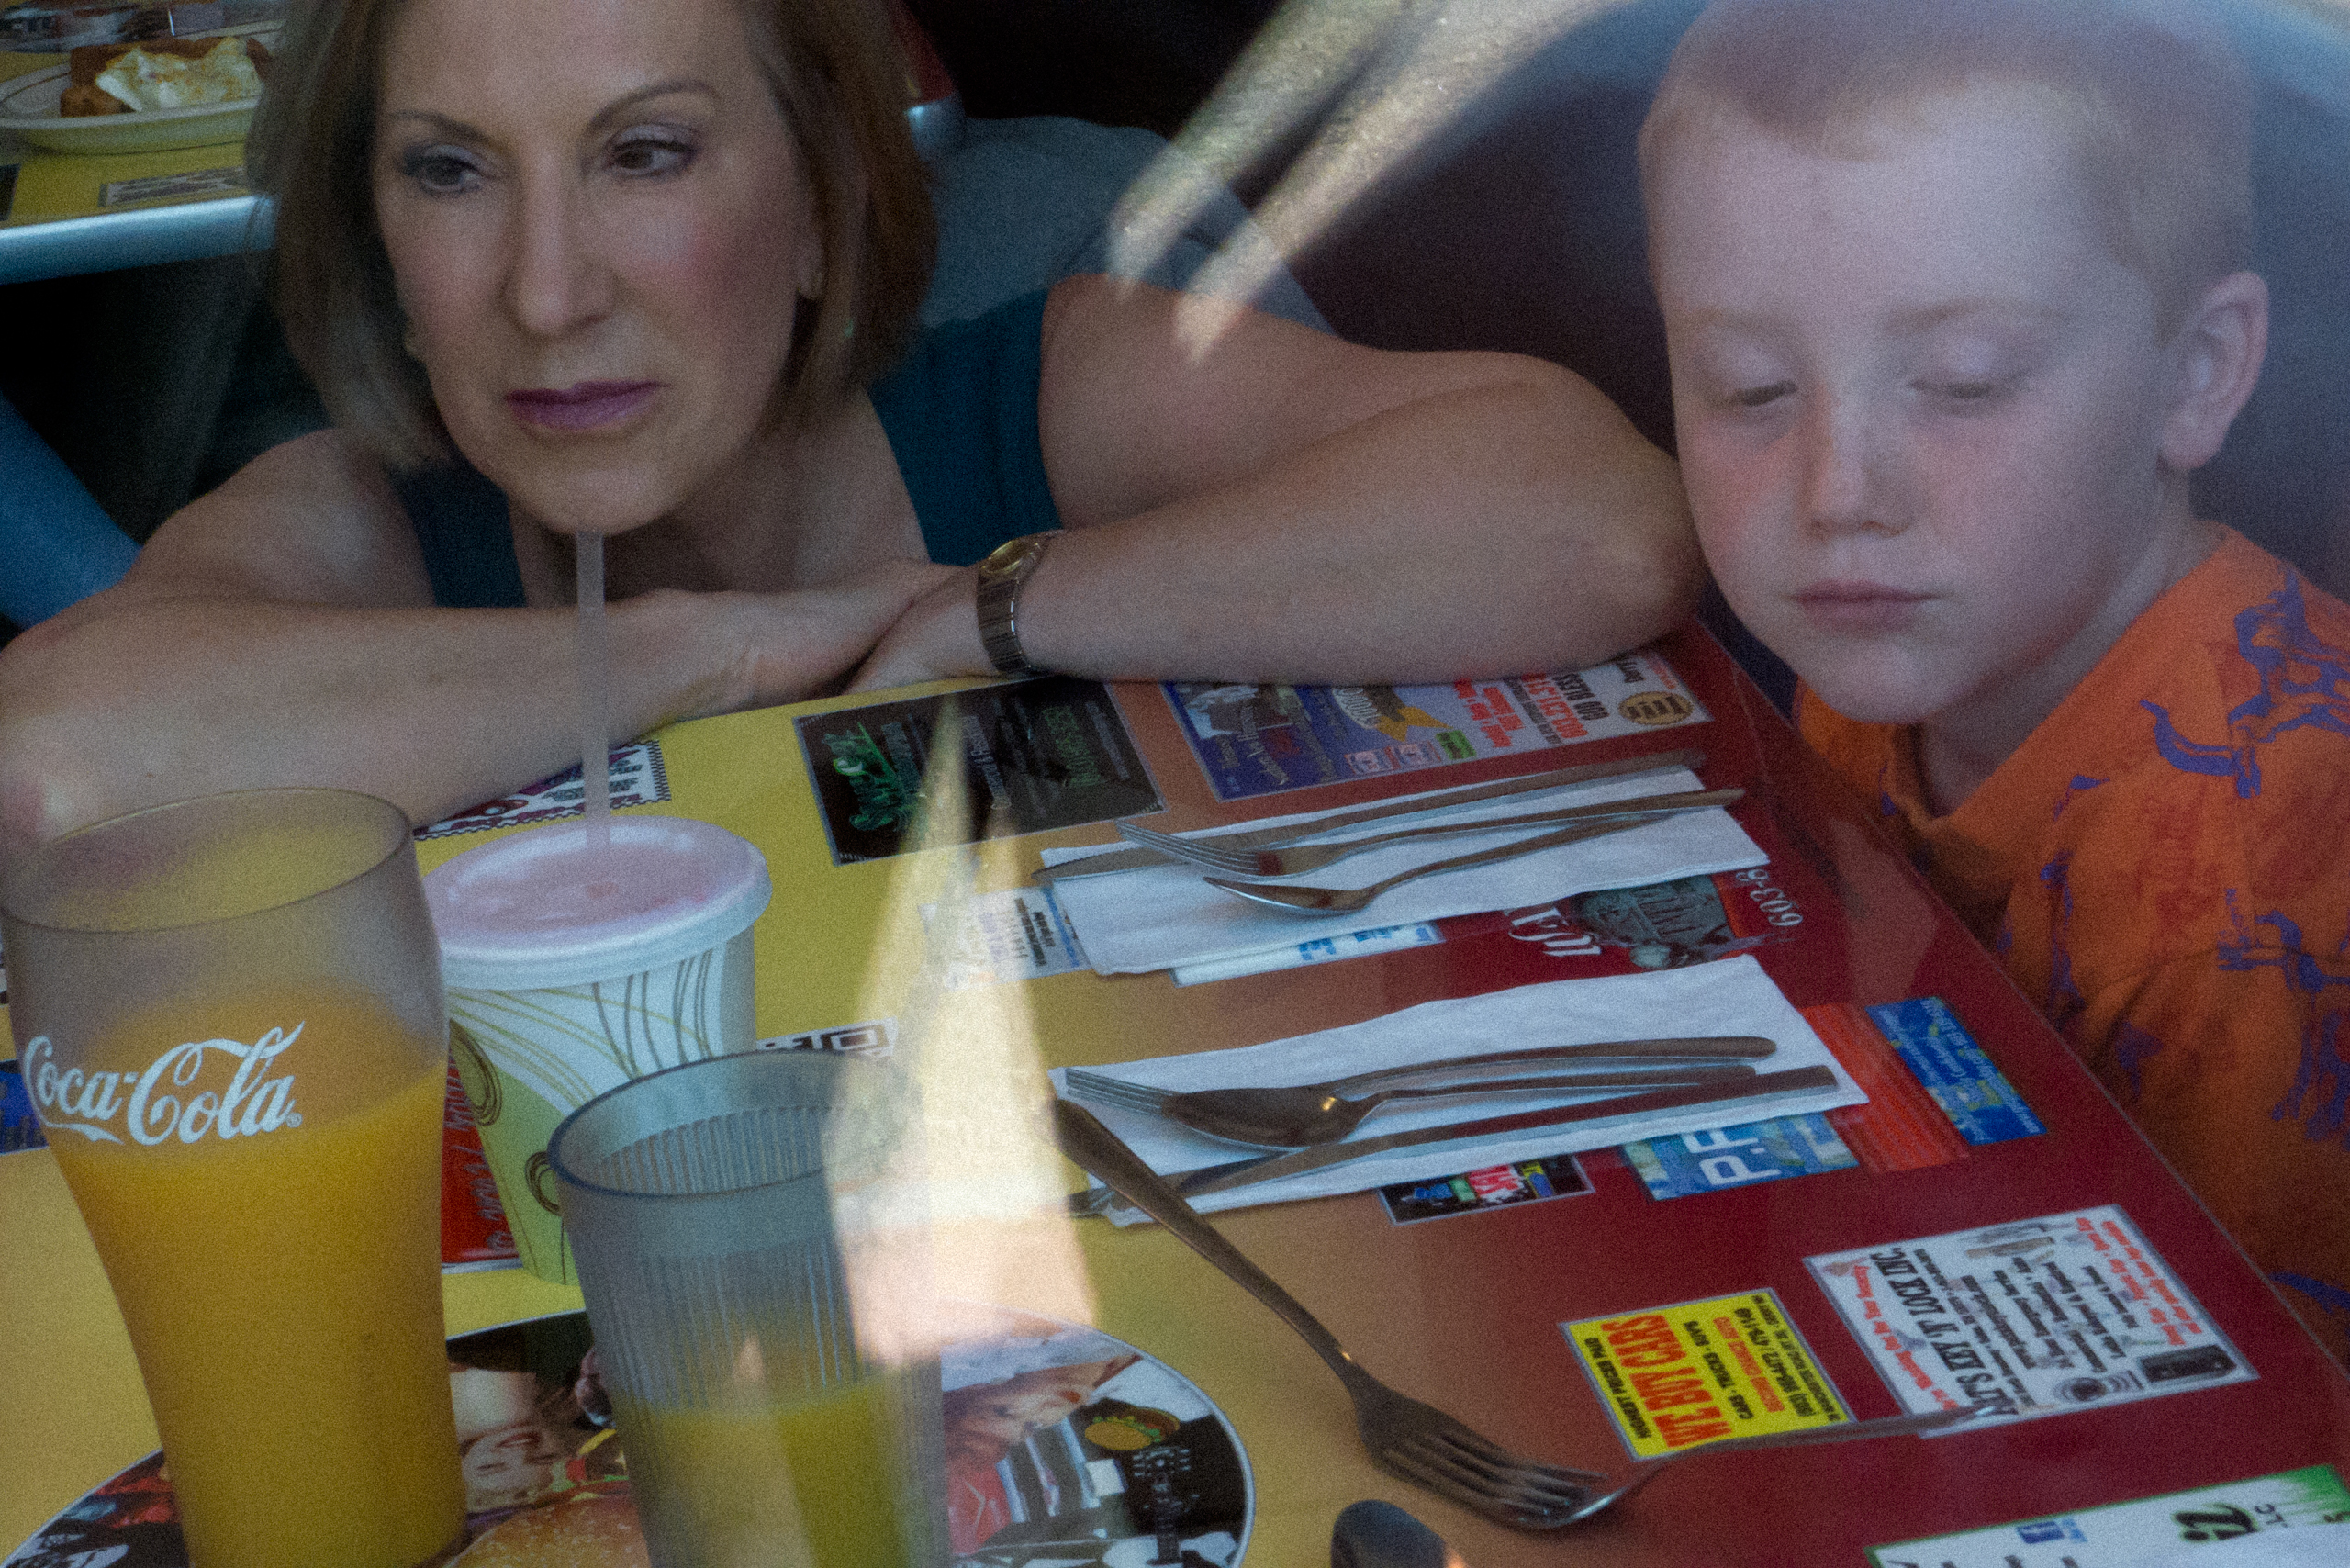 Carly Fiorina campaigning at a diner in Derry, NH 2015.